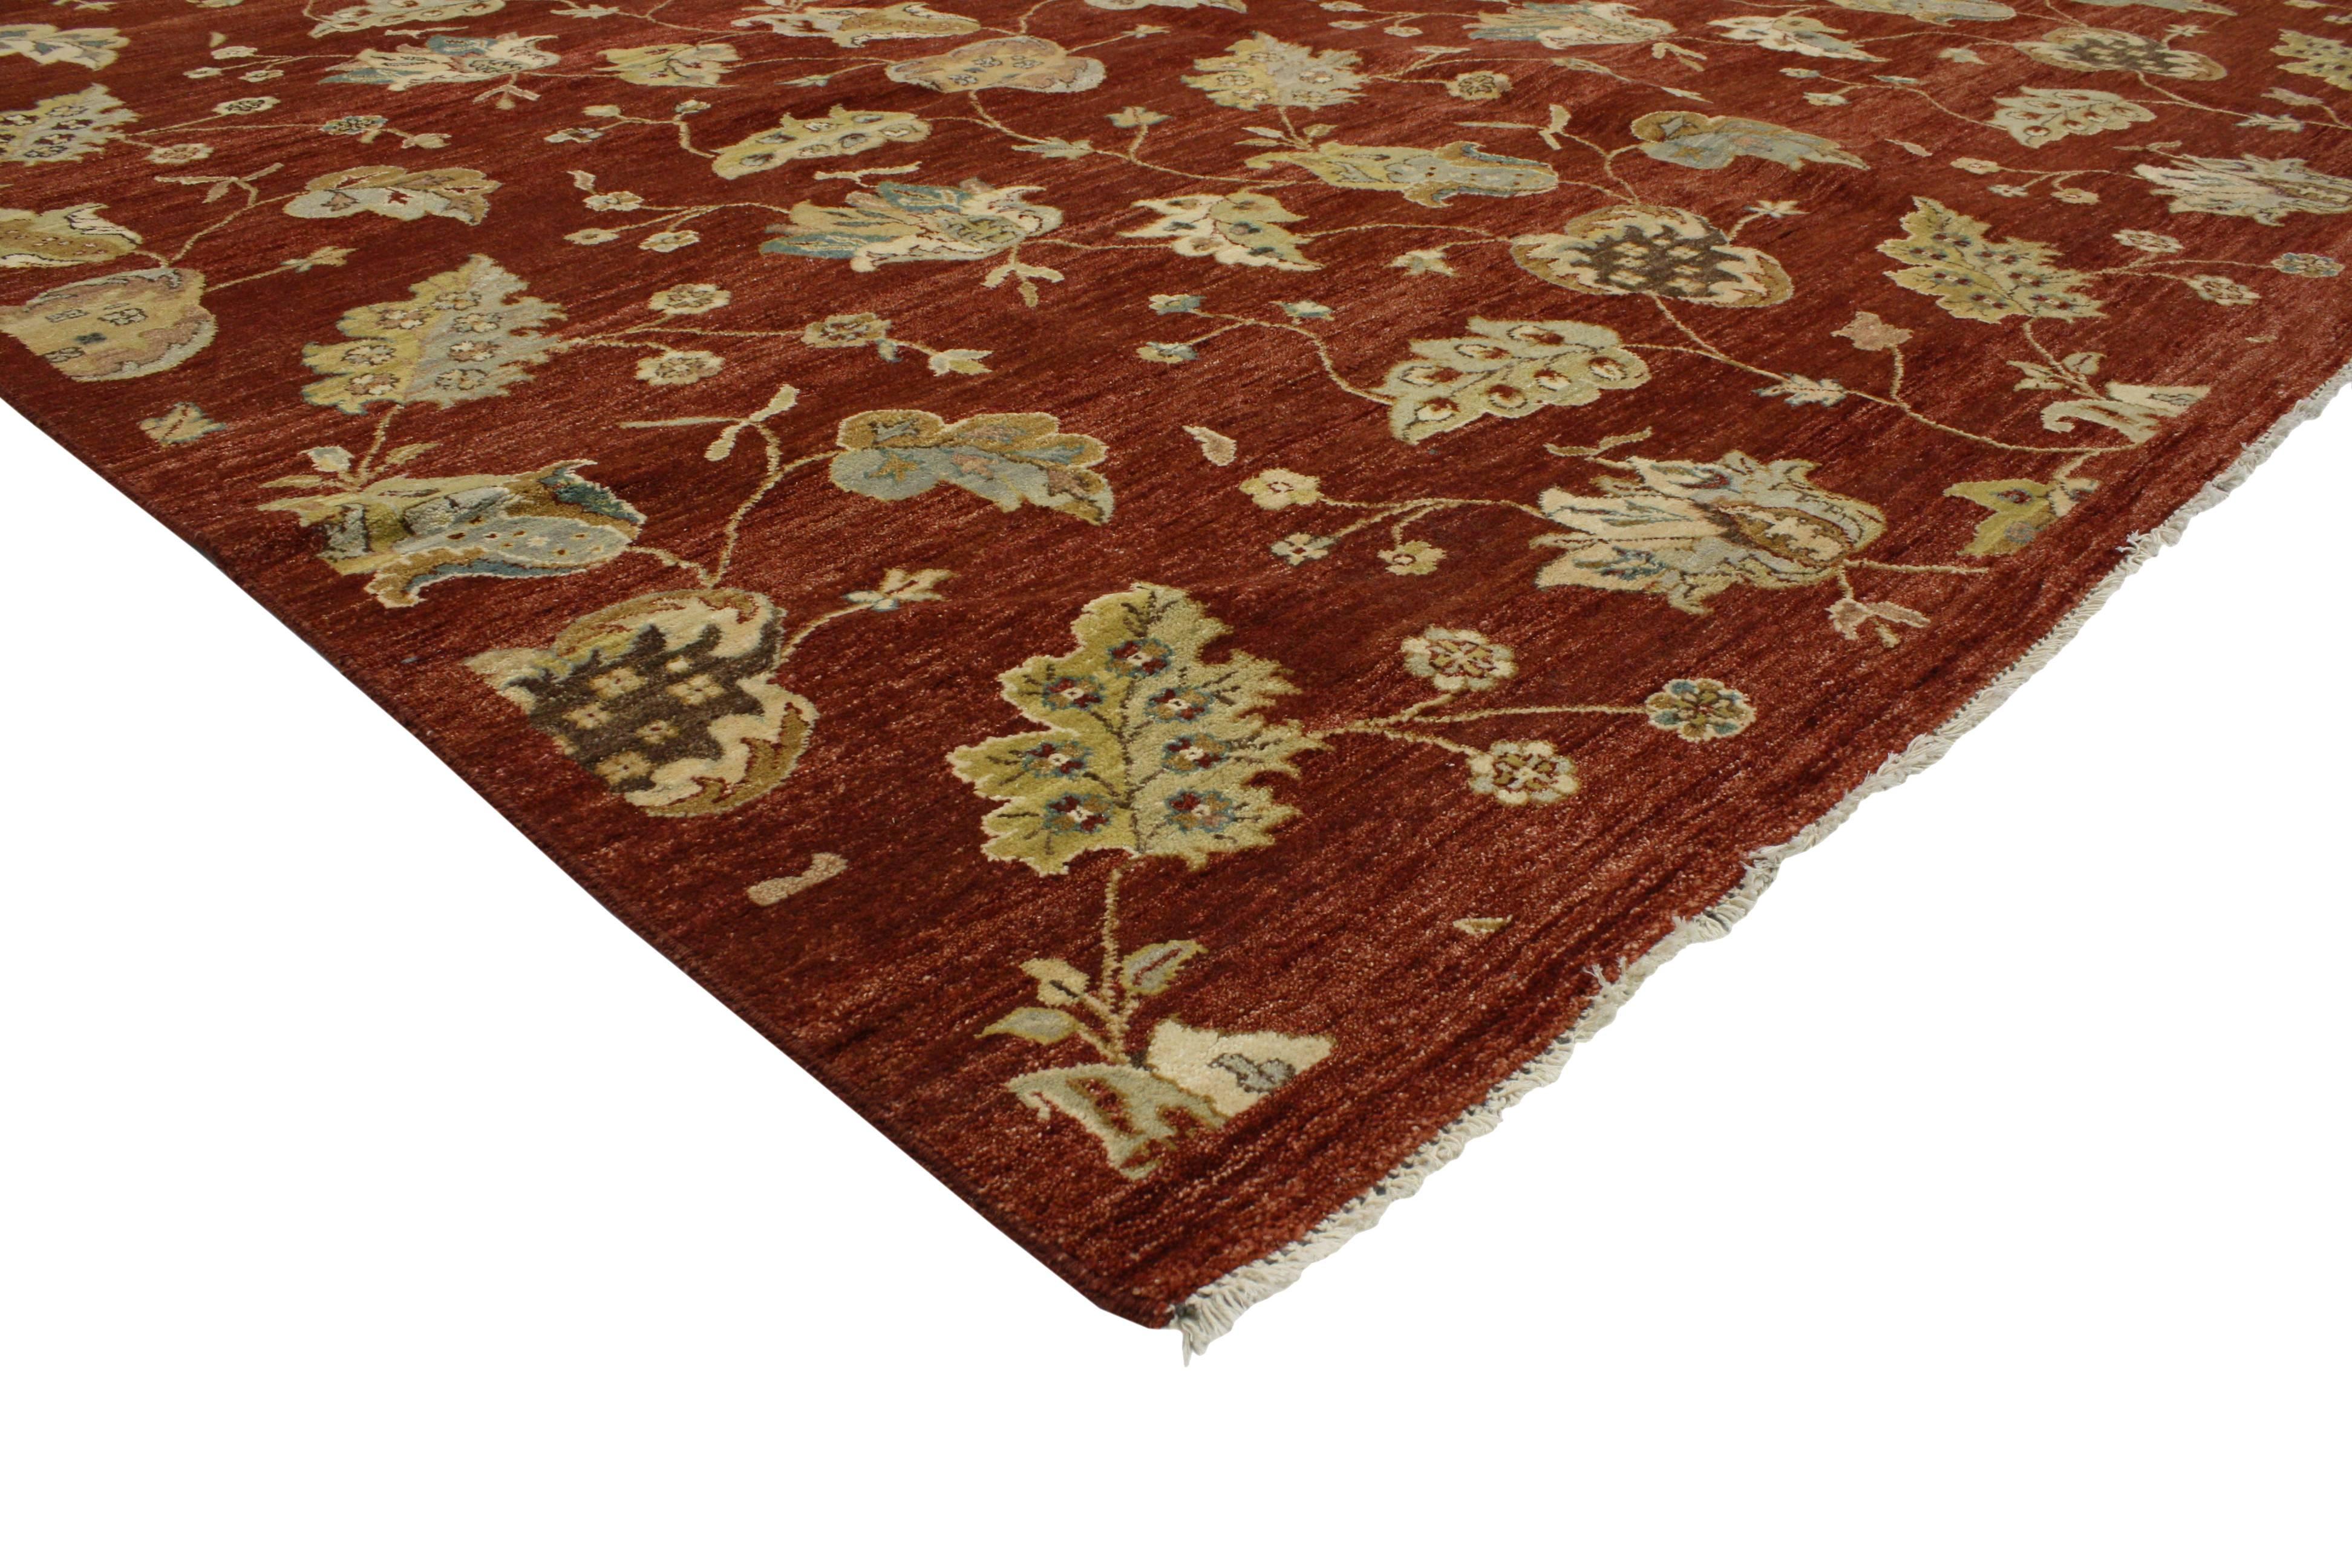 30291 New Transitional Square Rug with Modern Style, 08'00 x 08'03. The warm spice tone colors combined with the eye-catching floral pattern of this transitional style square rug make a major statement without visually overwhelming the rest of the